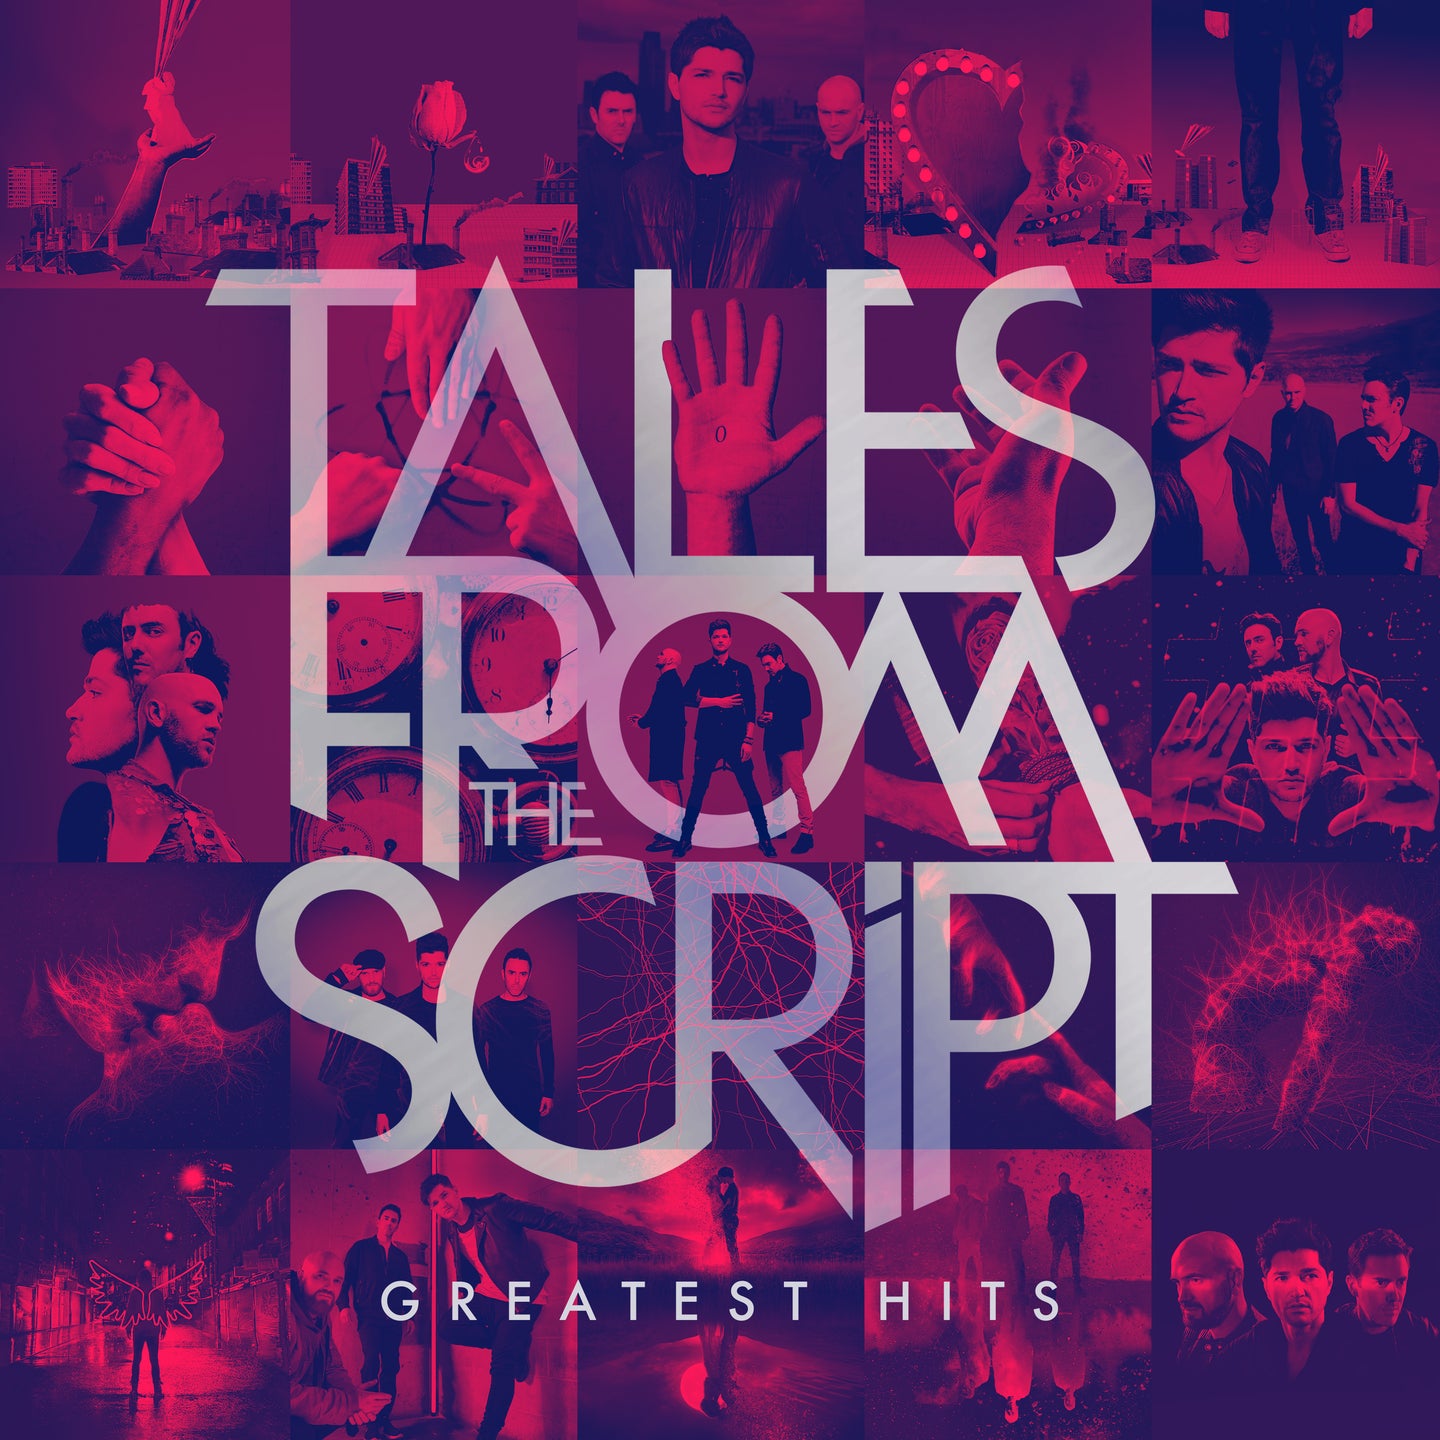 TALES FROM THE SCRIPT: GREATEST HITS (TRANSPARENT GREEN) VINYL